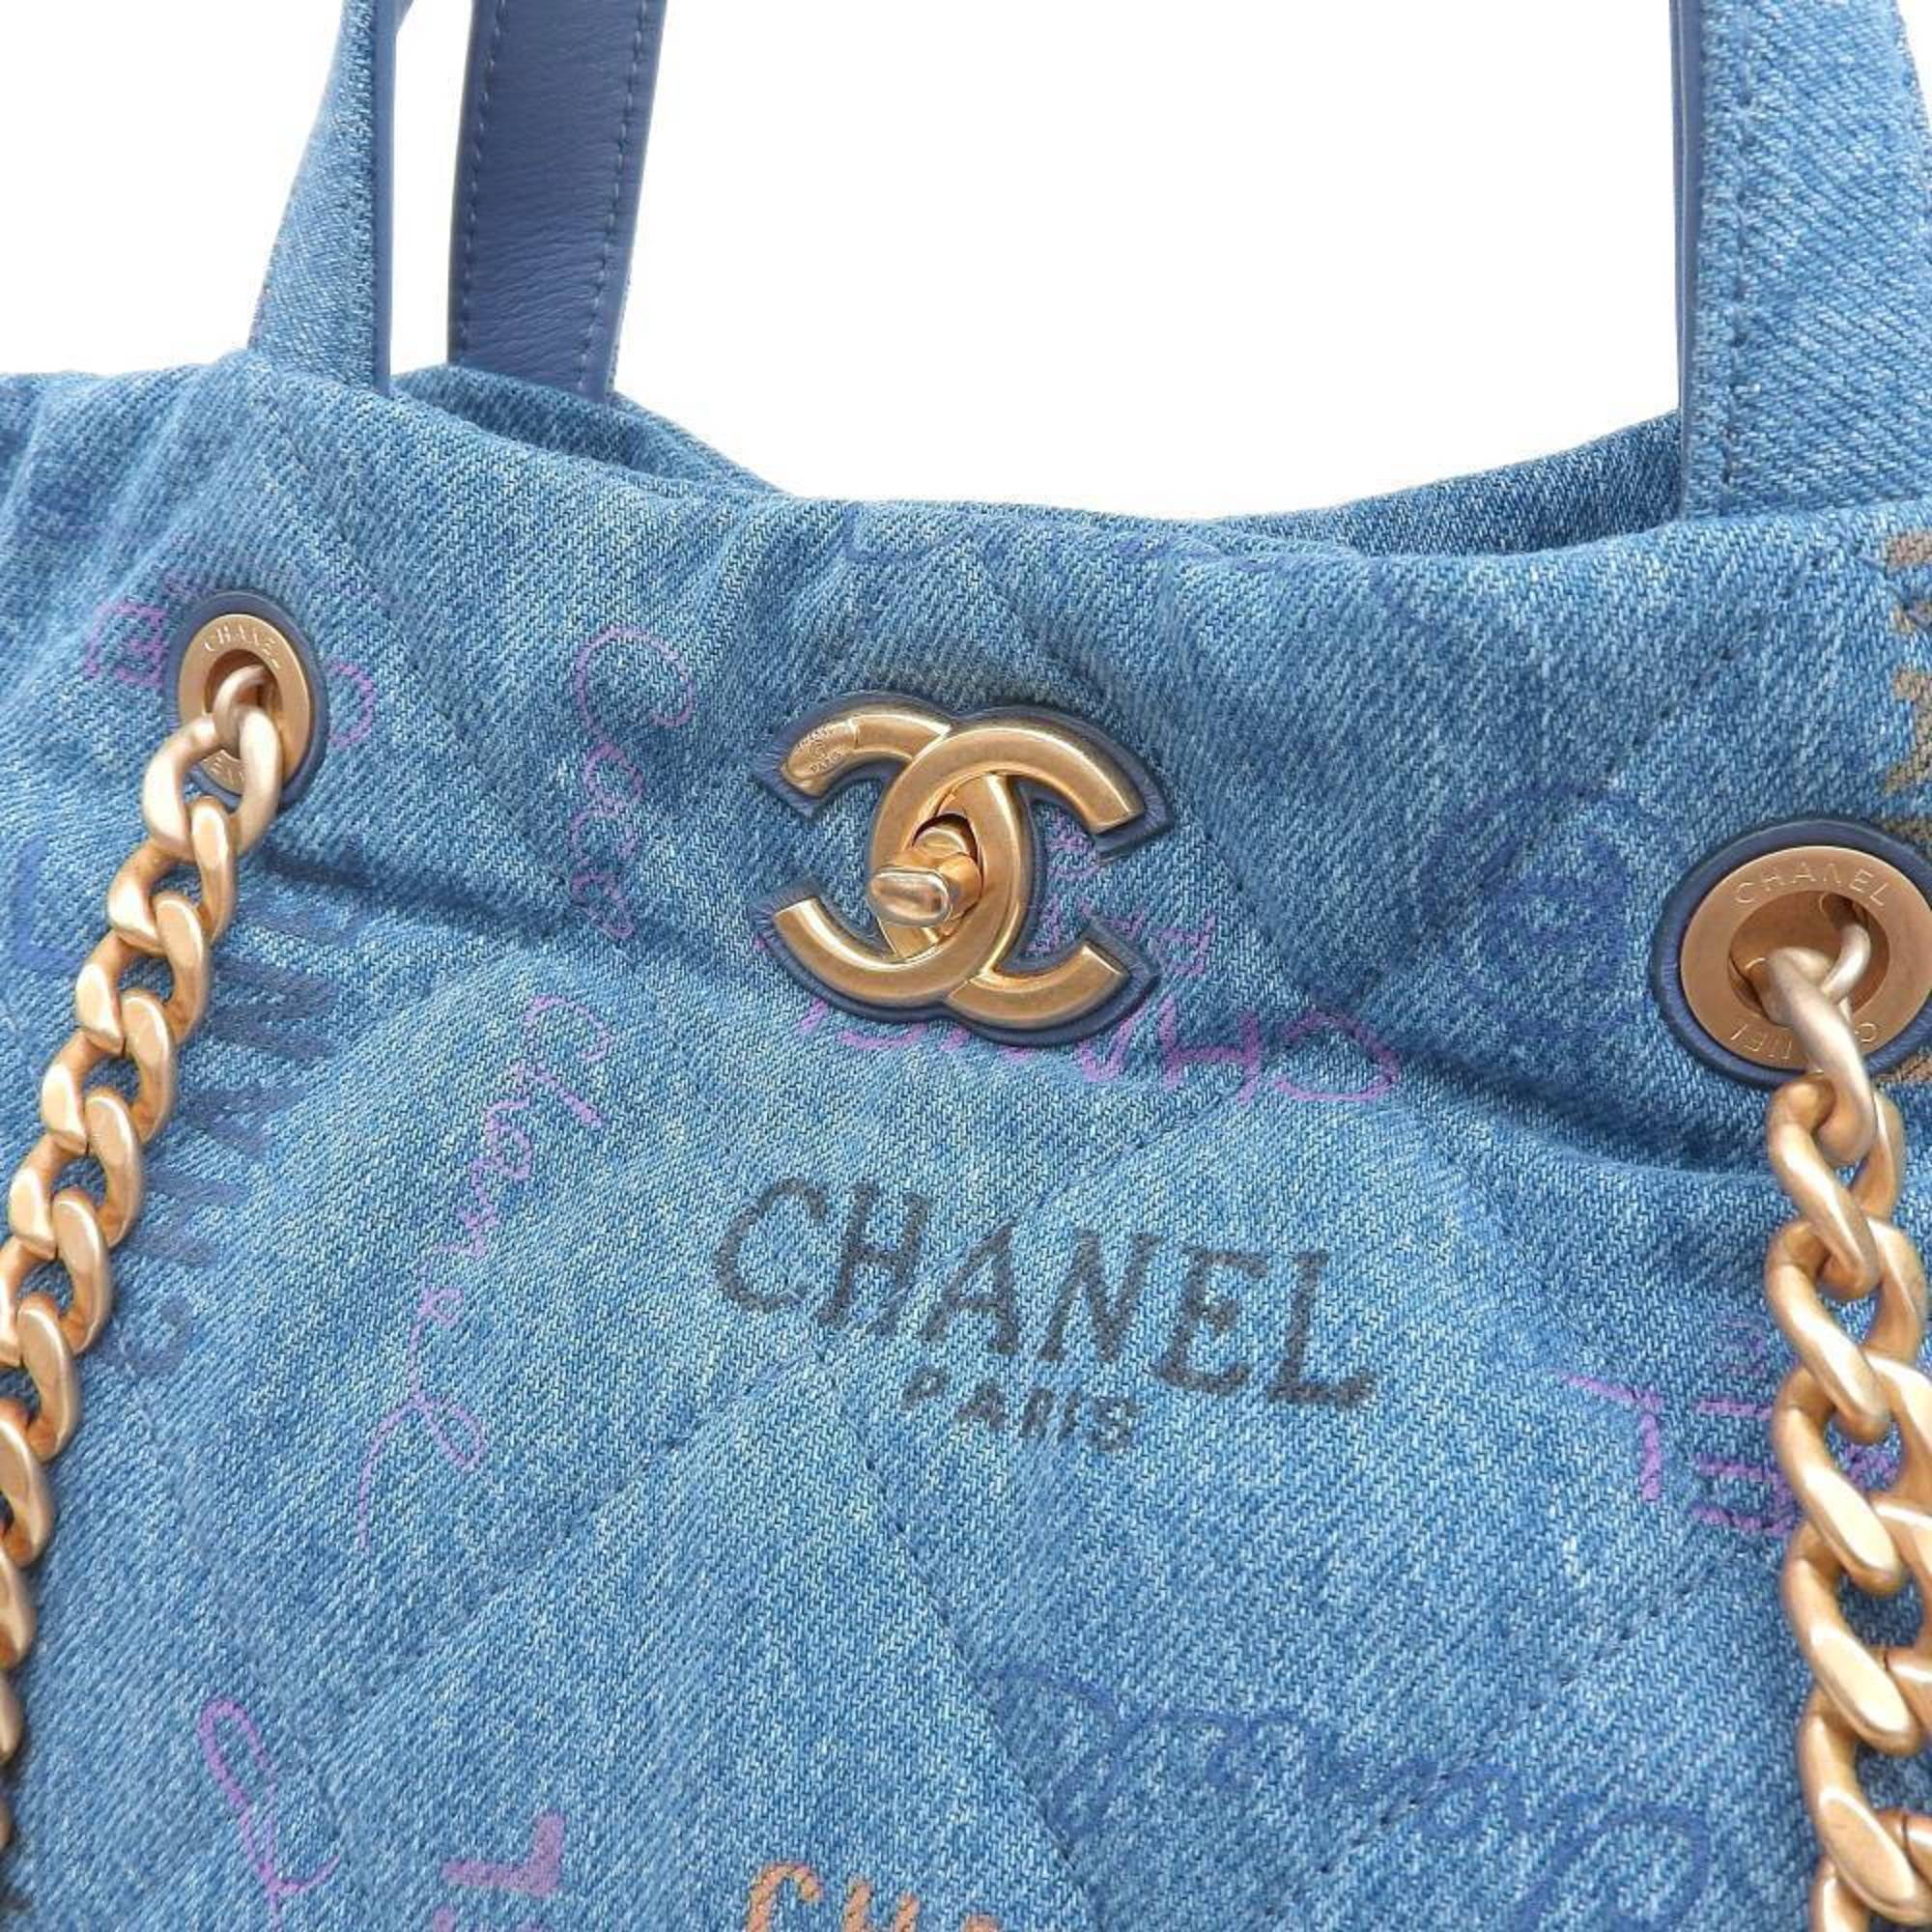 Pre-Owned Chanel CHANEL maxi shopping bag here mark 2WAY